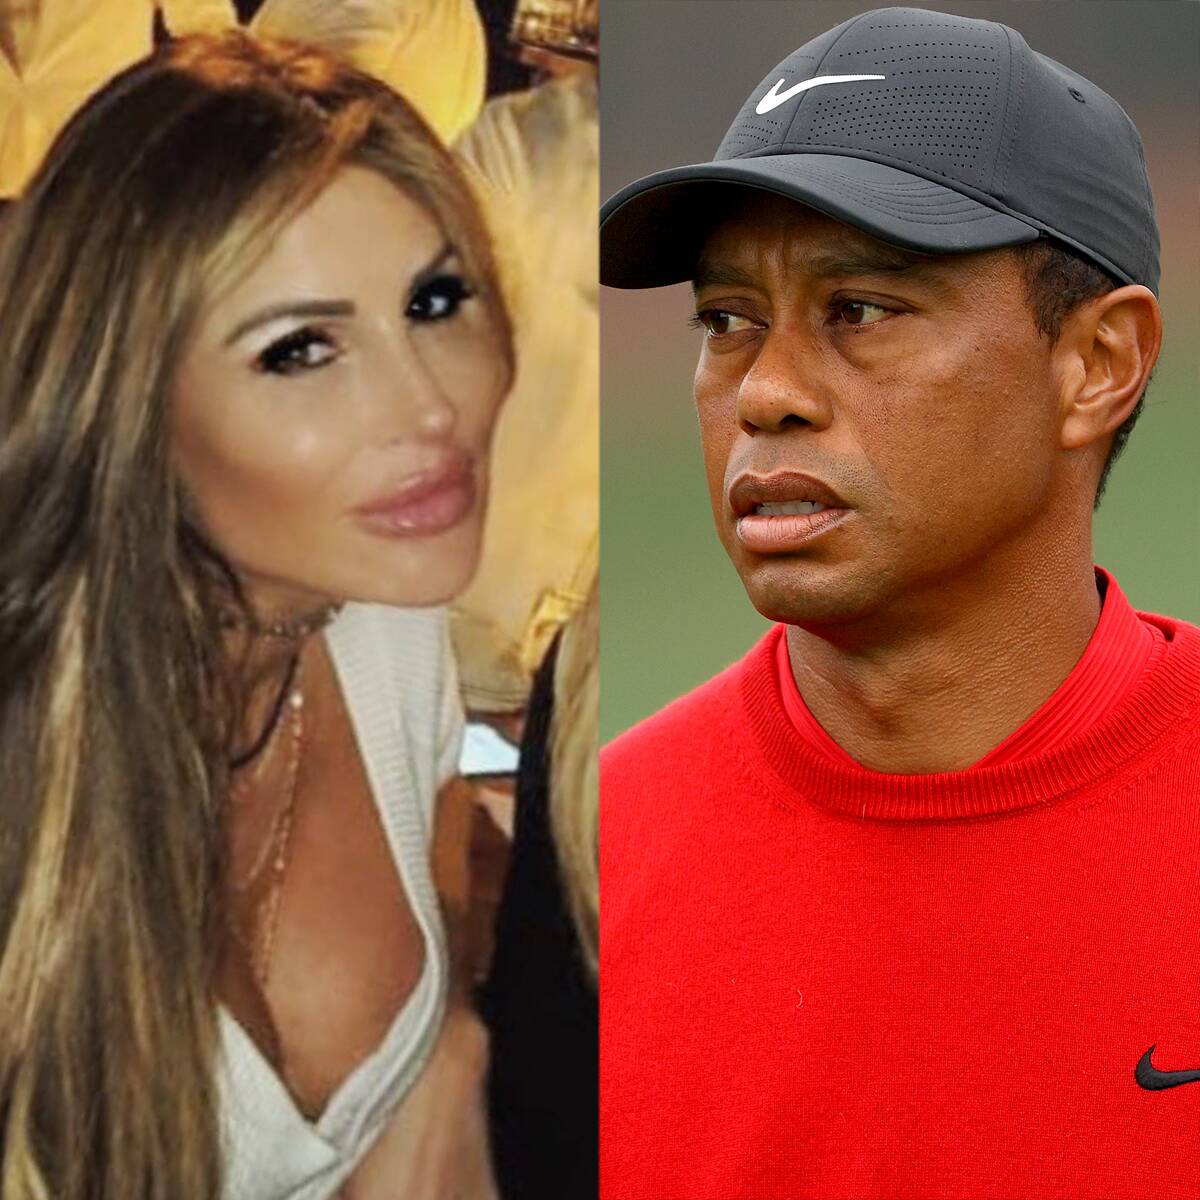 Rachel Uchitel Reveals Why She's Finally Speaking Out on the Tiger Woods Scandal